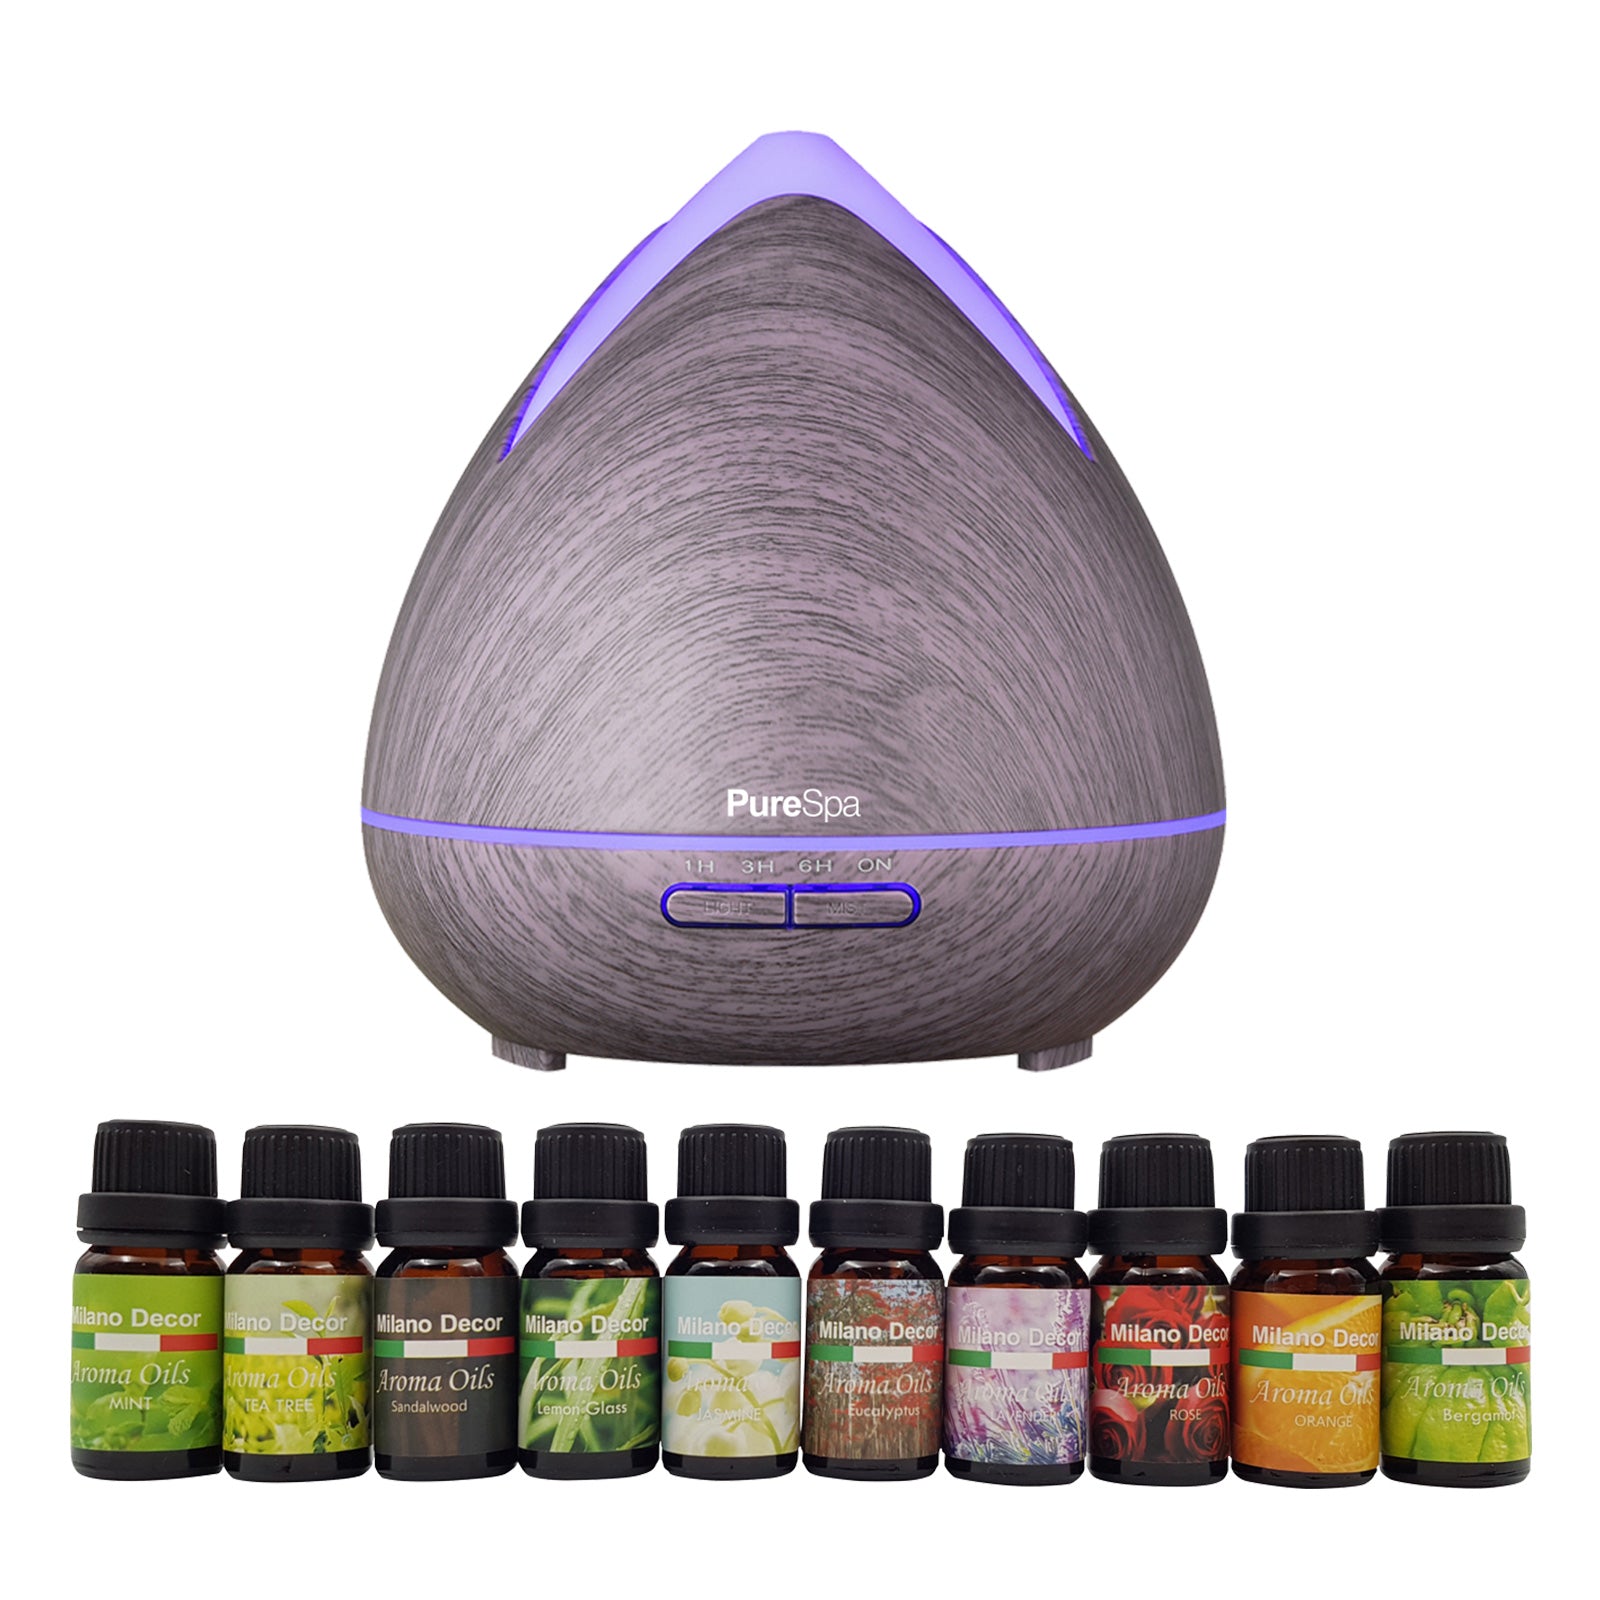 Purespa Diffuser Set With 10 Pack Diffuser Oils Humidifier Aromatherapy - Violet - SILBERSHELL